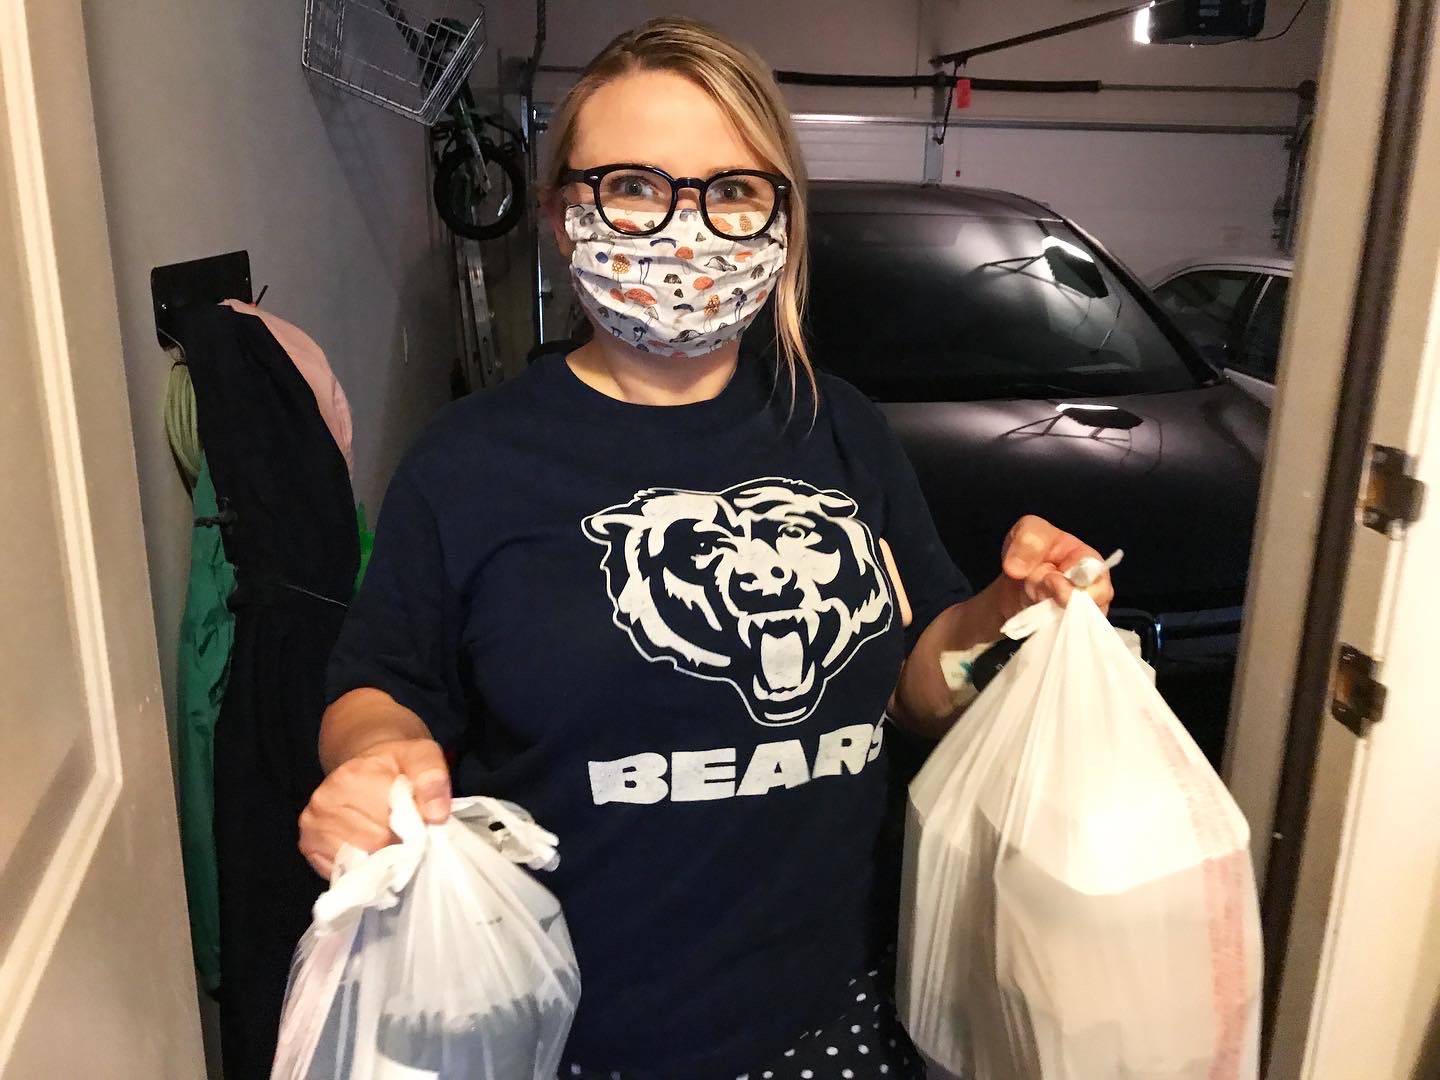 Alyssa Buckley wears a mask and holds two plastic bags of to-go orders. She stands in the threshold of garage and house with the door ajar revealing a dark garage. Photo by Alyssa Buckley.